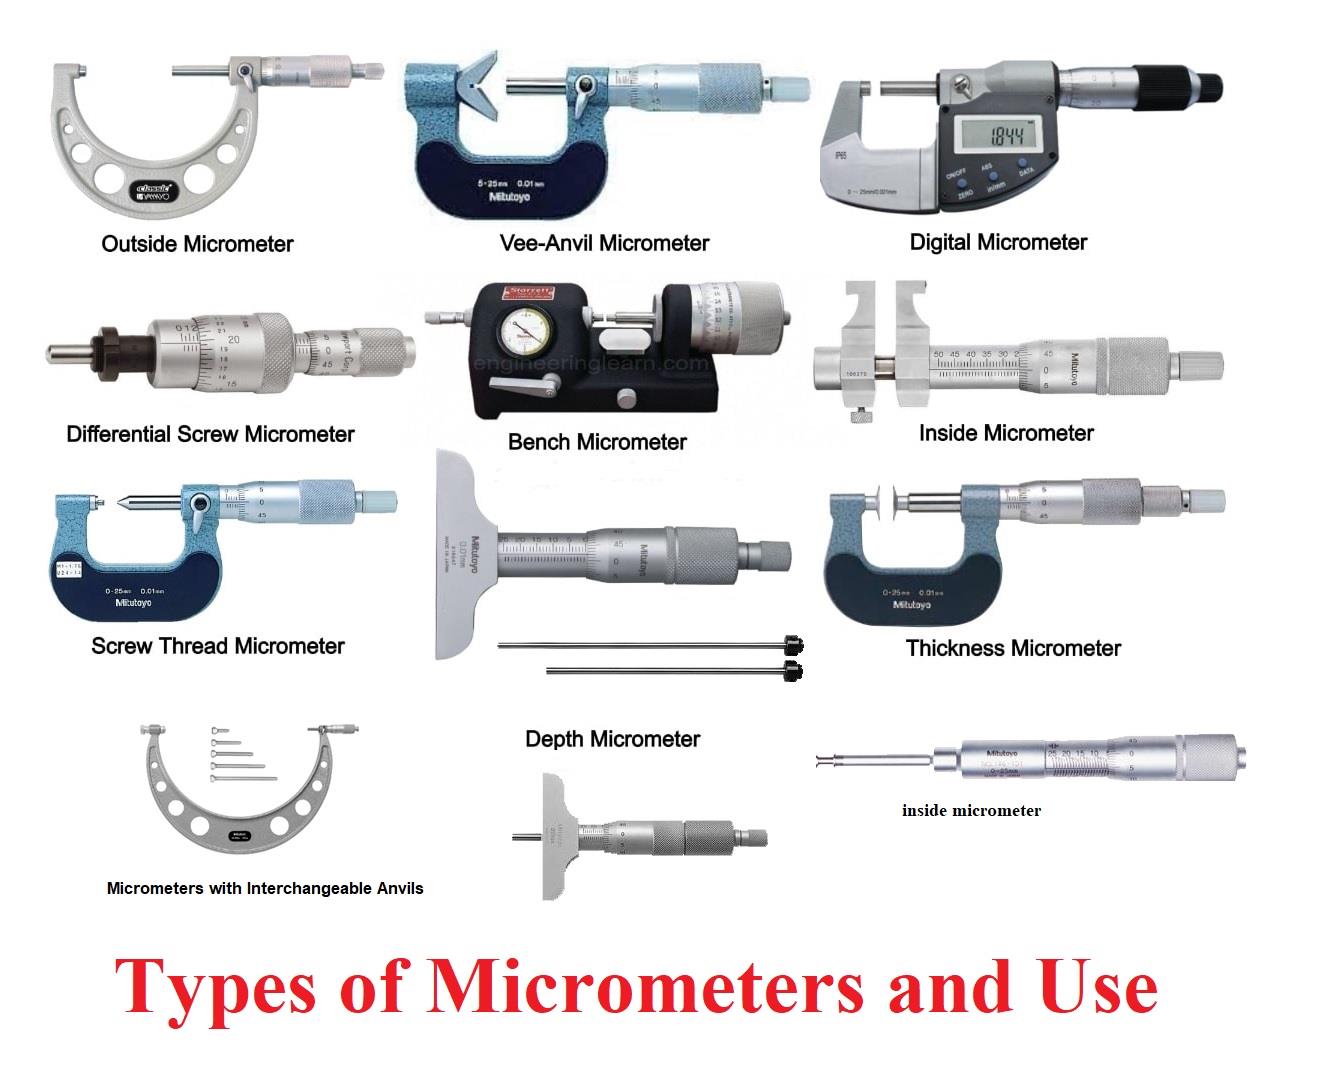 Oneffenheden moed discretie Types of Micrometers and their uses